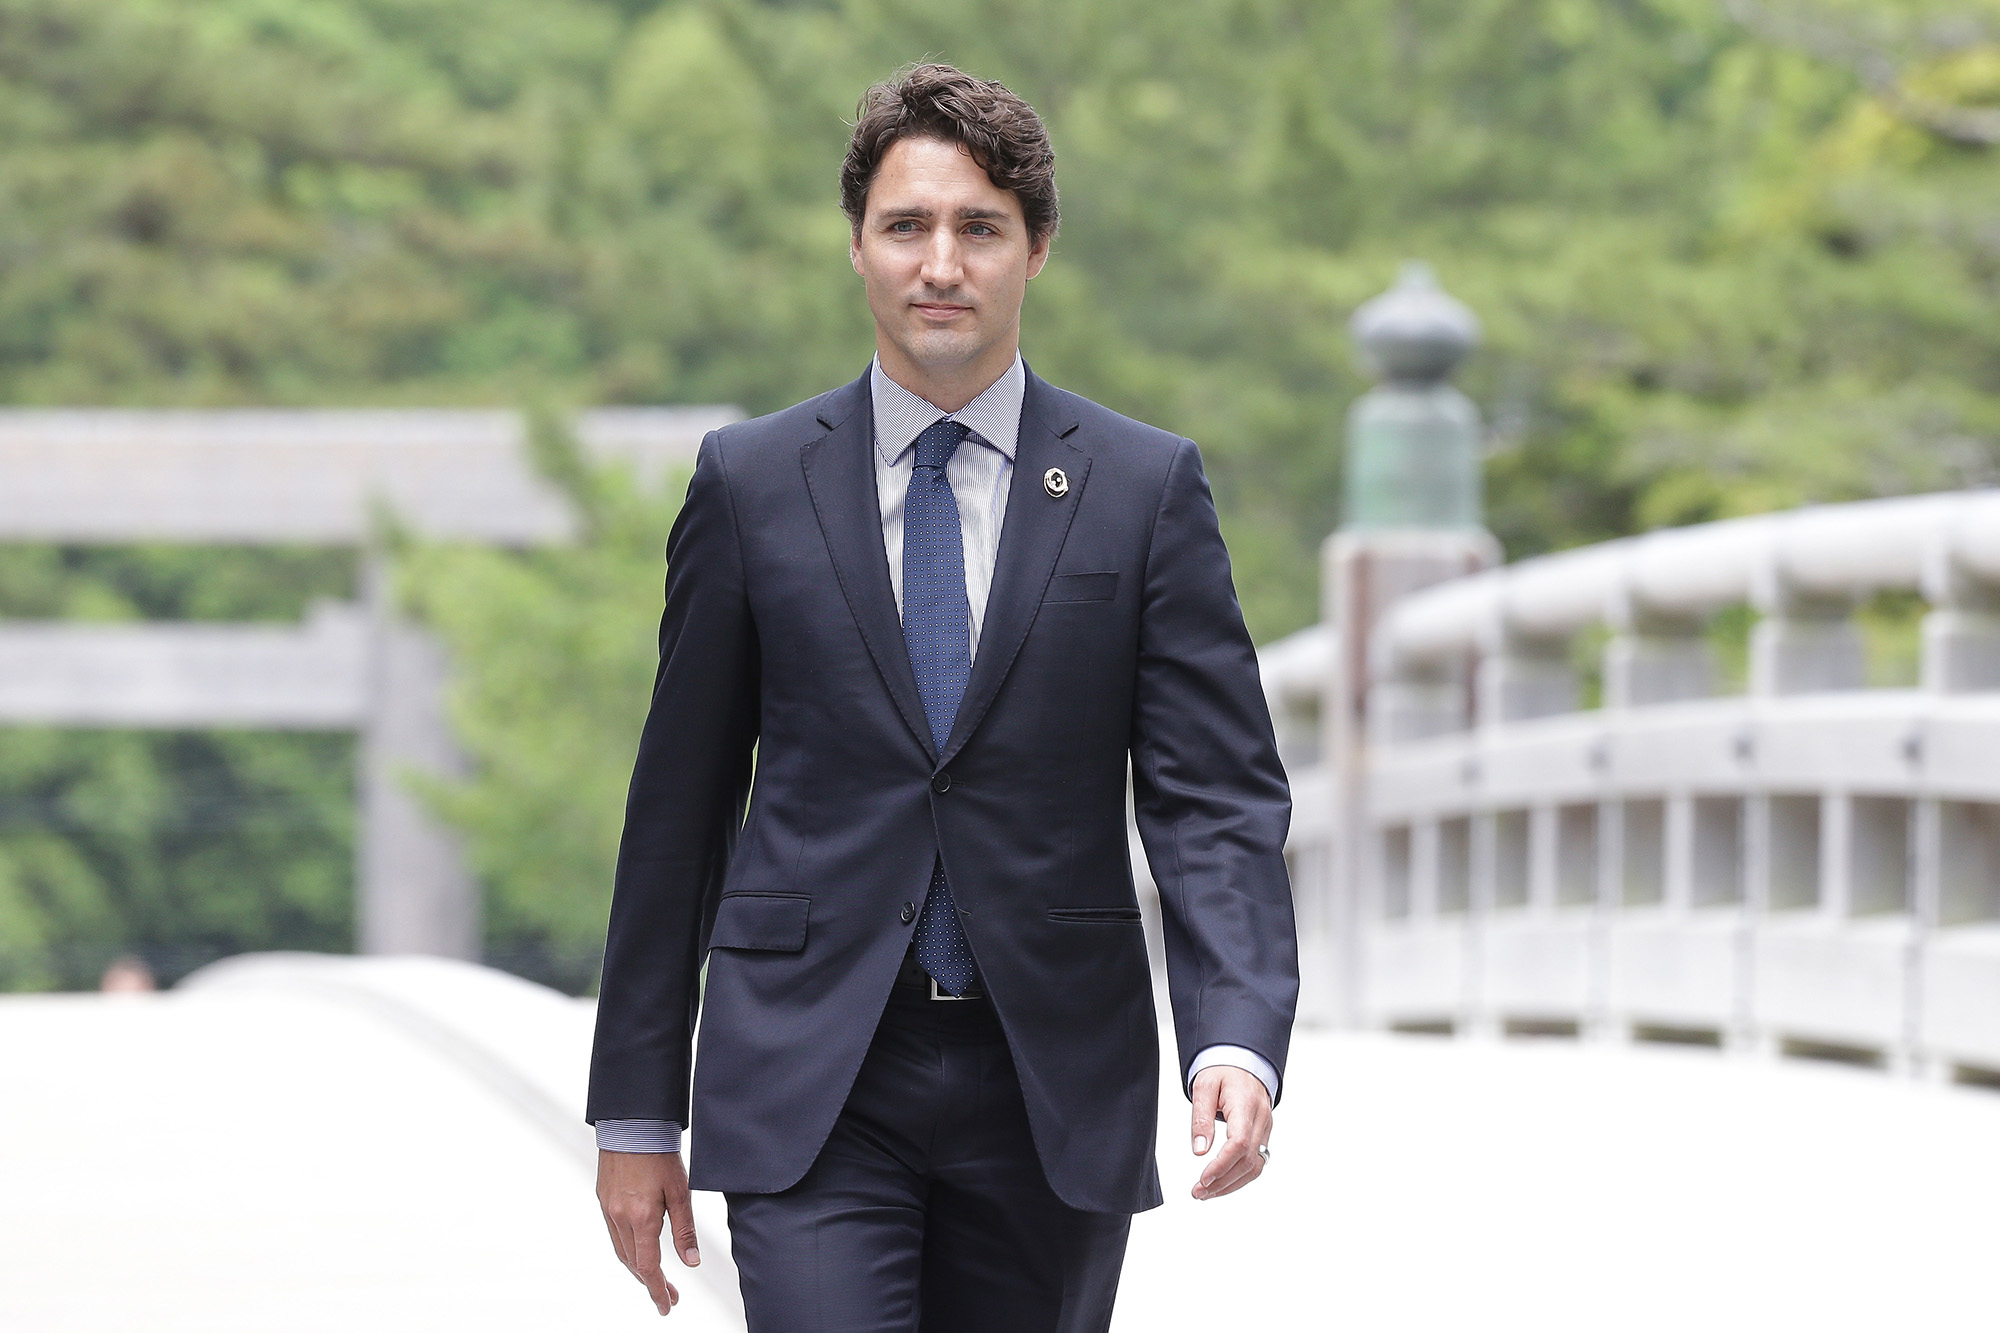 ISE, JAPAN - MAY 26:  Canadian Prime Minister Justin Trudeau walks on the Ujibashi bridge as he visits at the Ise-Jingu Shrine (Photo by Chung Sung-Jun/Getty Images) (Chung Sung-Jun&mdash;Getty Images)